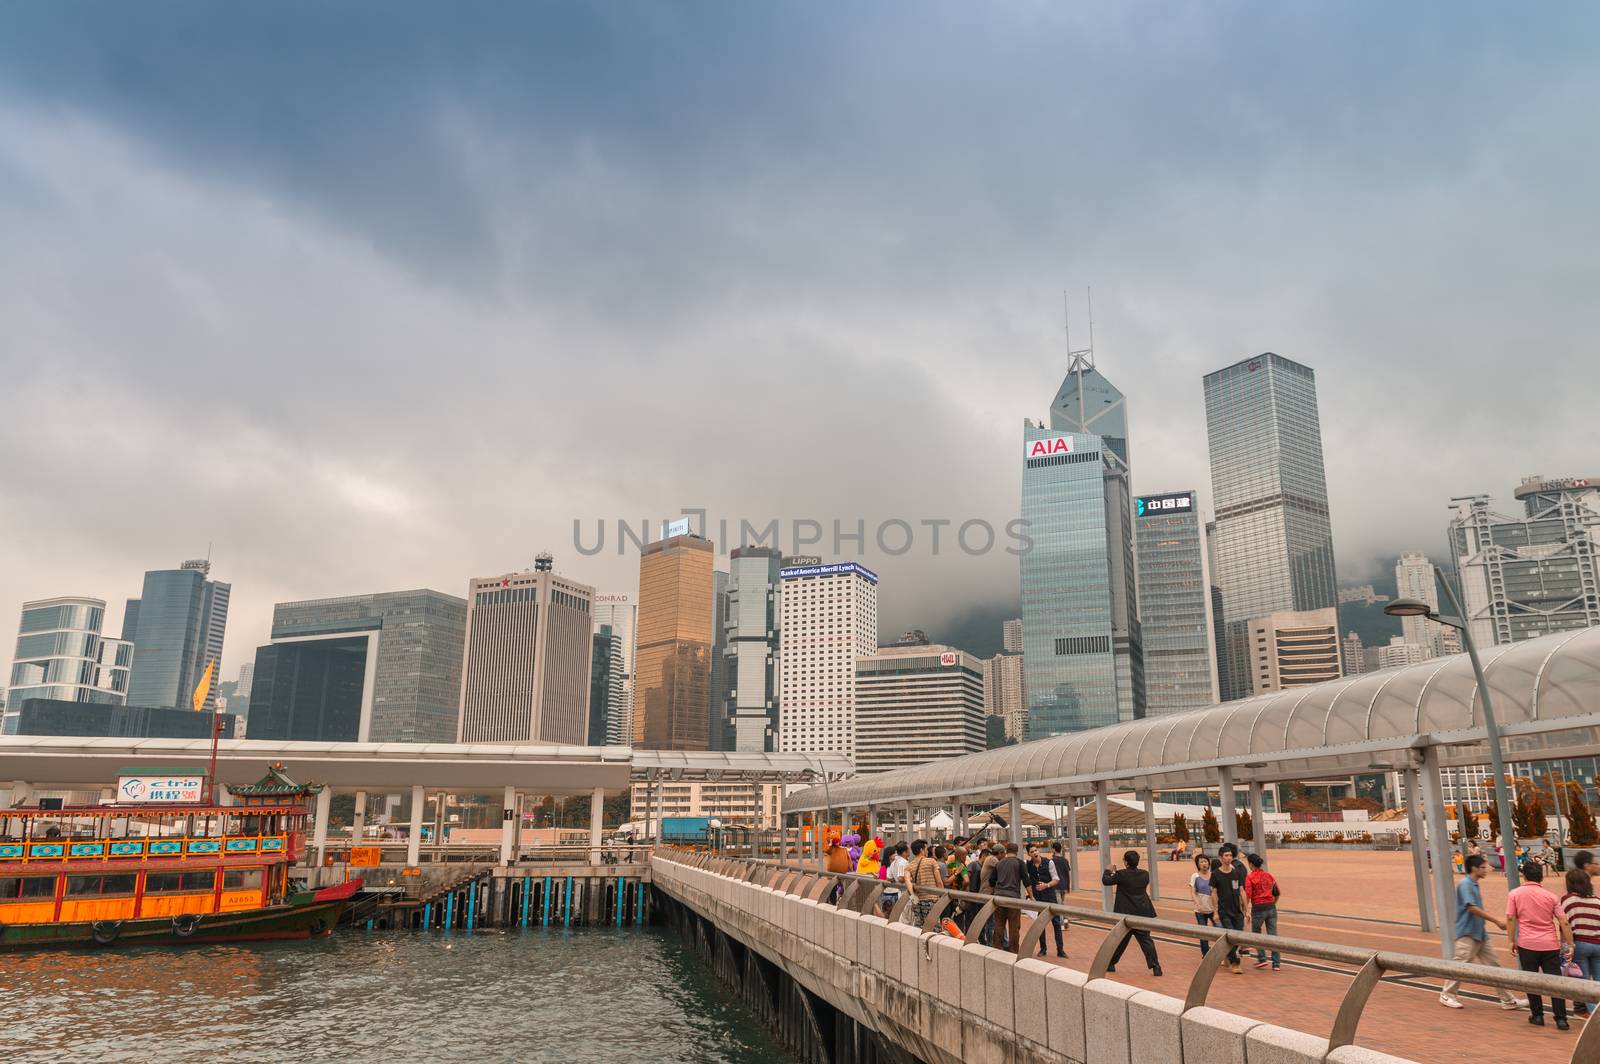 HONG KONG - APRIL 15, 2014: Hong Kong skyline on a spring day. Hong Kong is visited by more tha 20 million people annually.